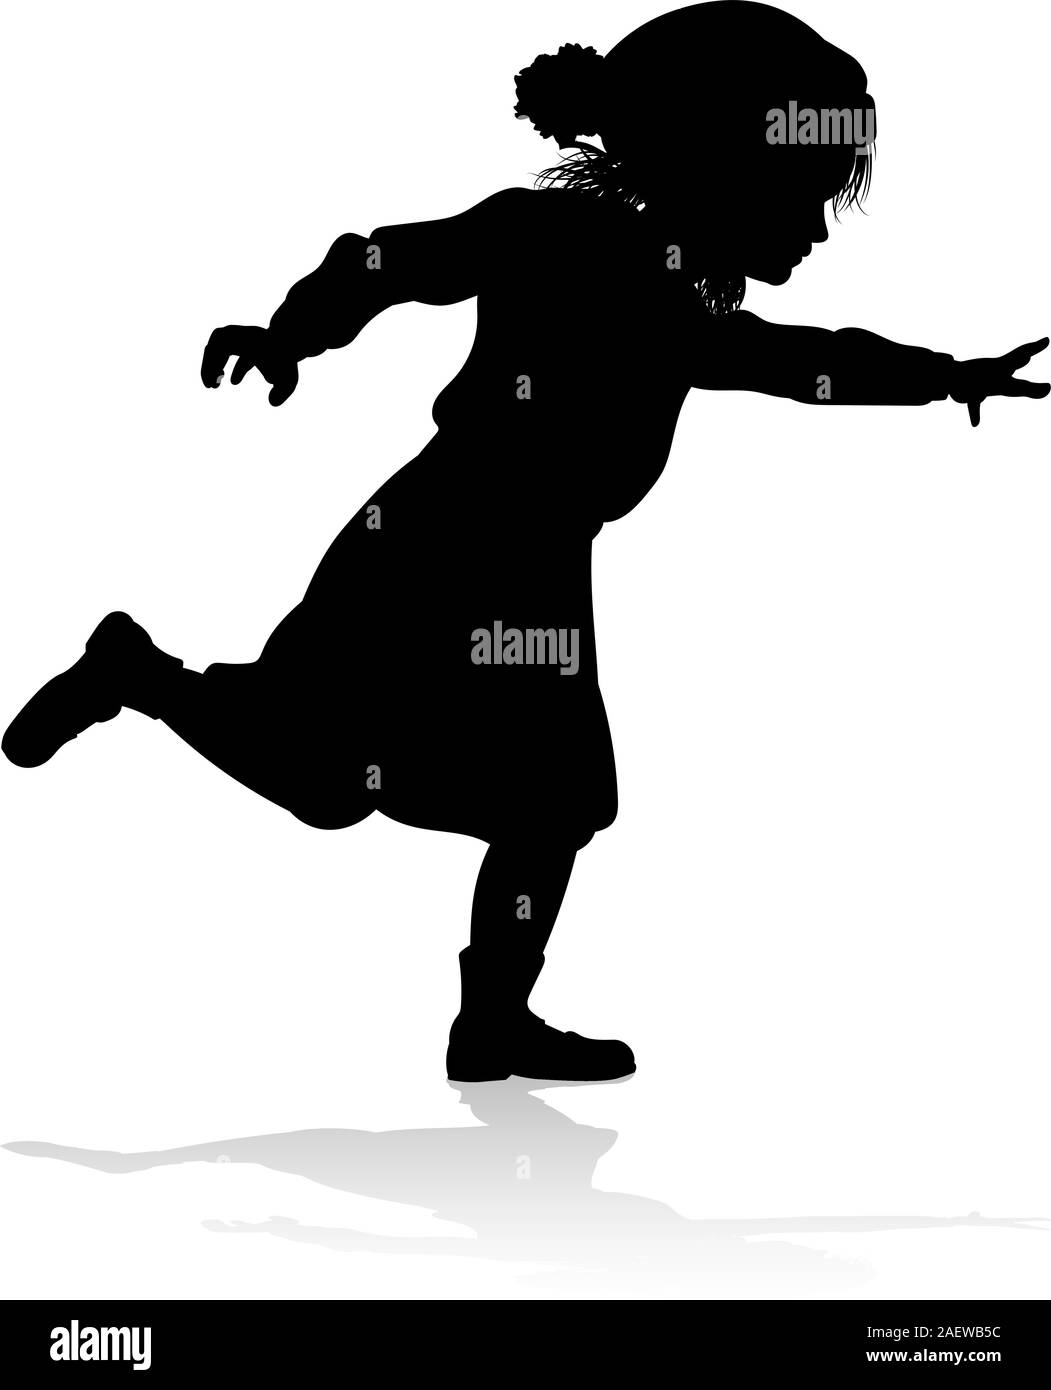 Silhouette Kid Child In Winter Christmas Clothing Stock Vector